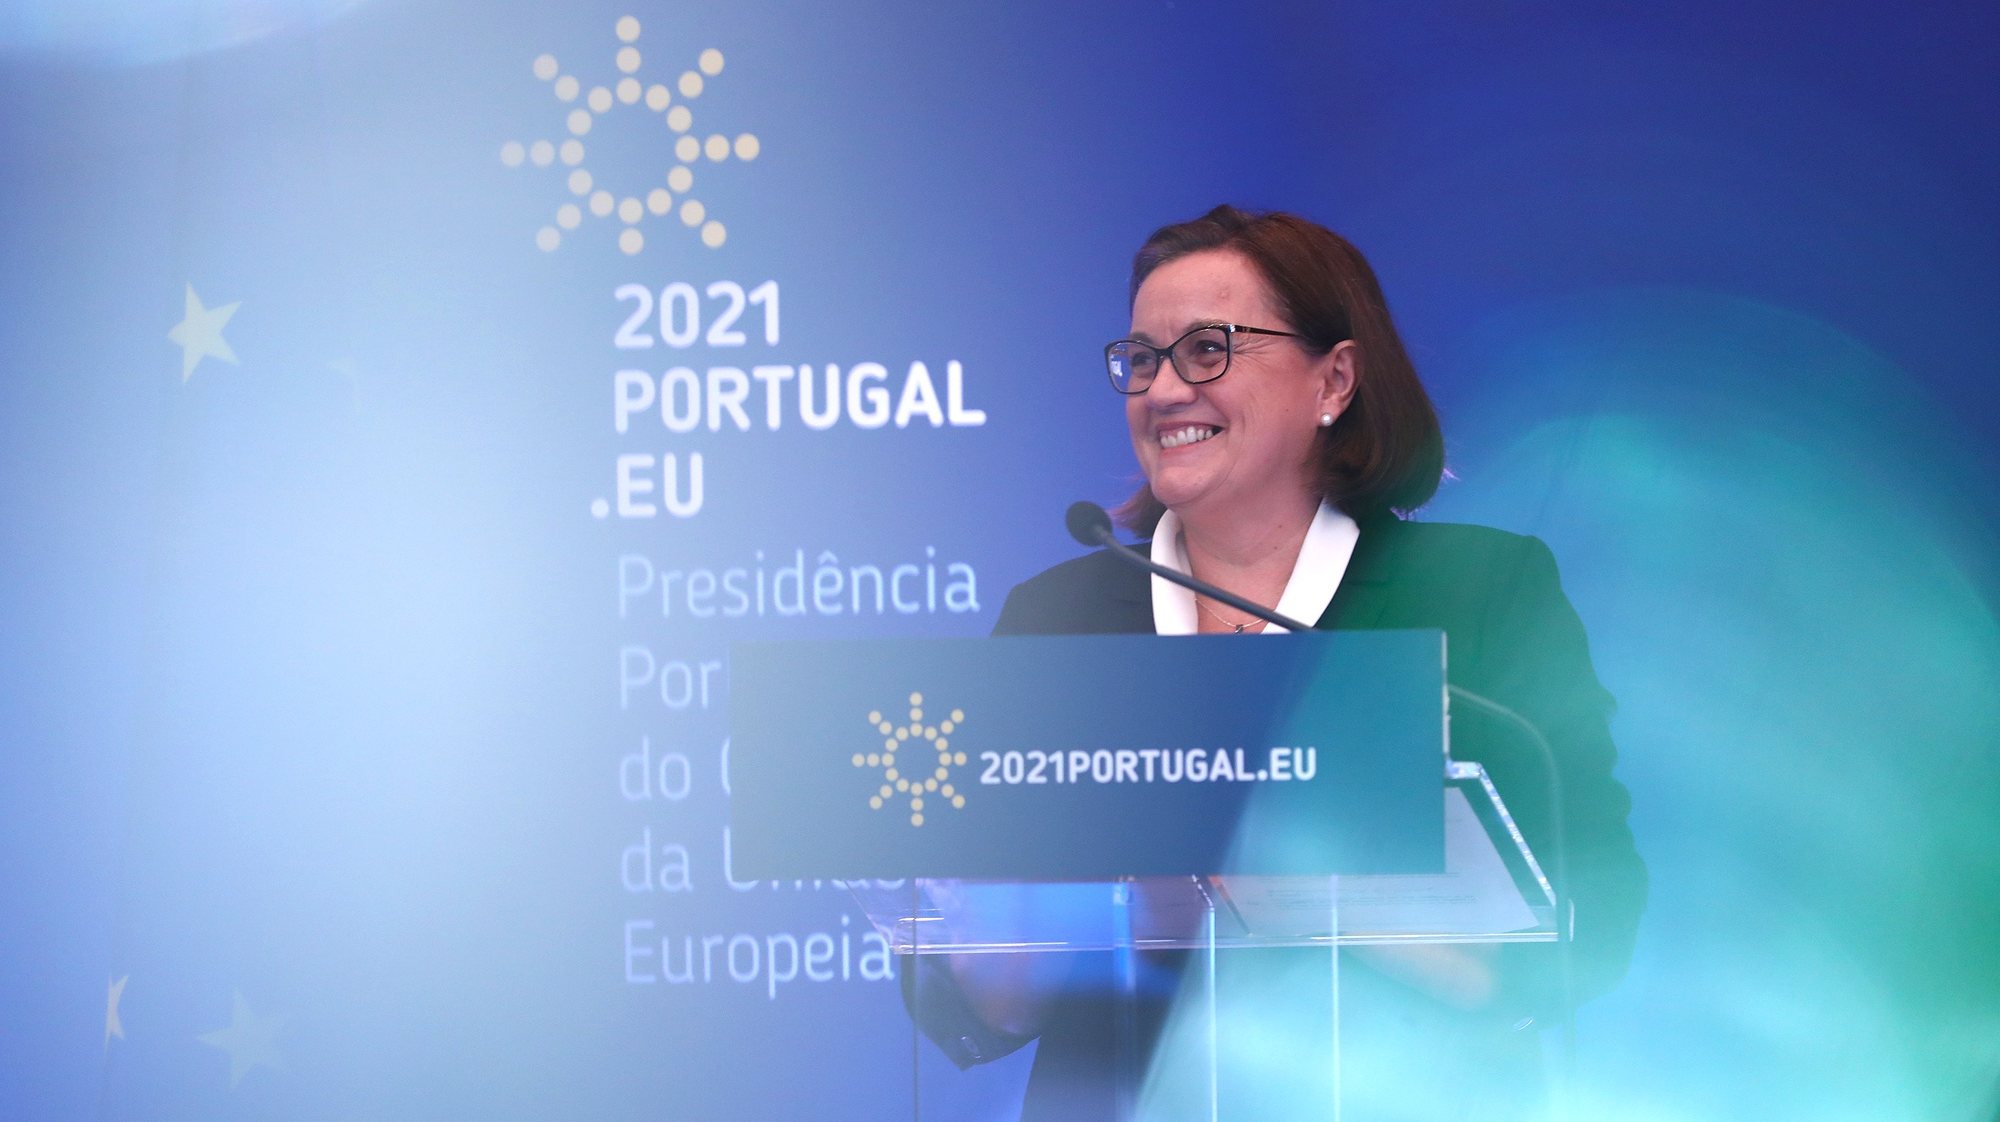 epa09031980 Portuguese Secretary of State for European Affairs, Ana Paula Zacarias, attends a press conference after an Informal video conference of the Ministers of European Affairs, in Lisbon, Portugal, 23 February 2021. Ministers were to exchange views on the European Democracy Action Plan and they will also assess the state of play in EU-UK relations.  EPA/ANTONIO PEDRO SANTOS